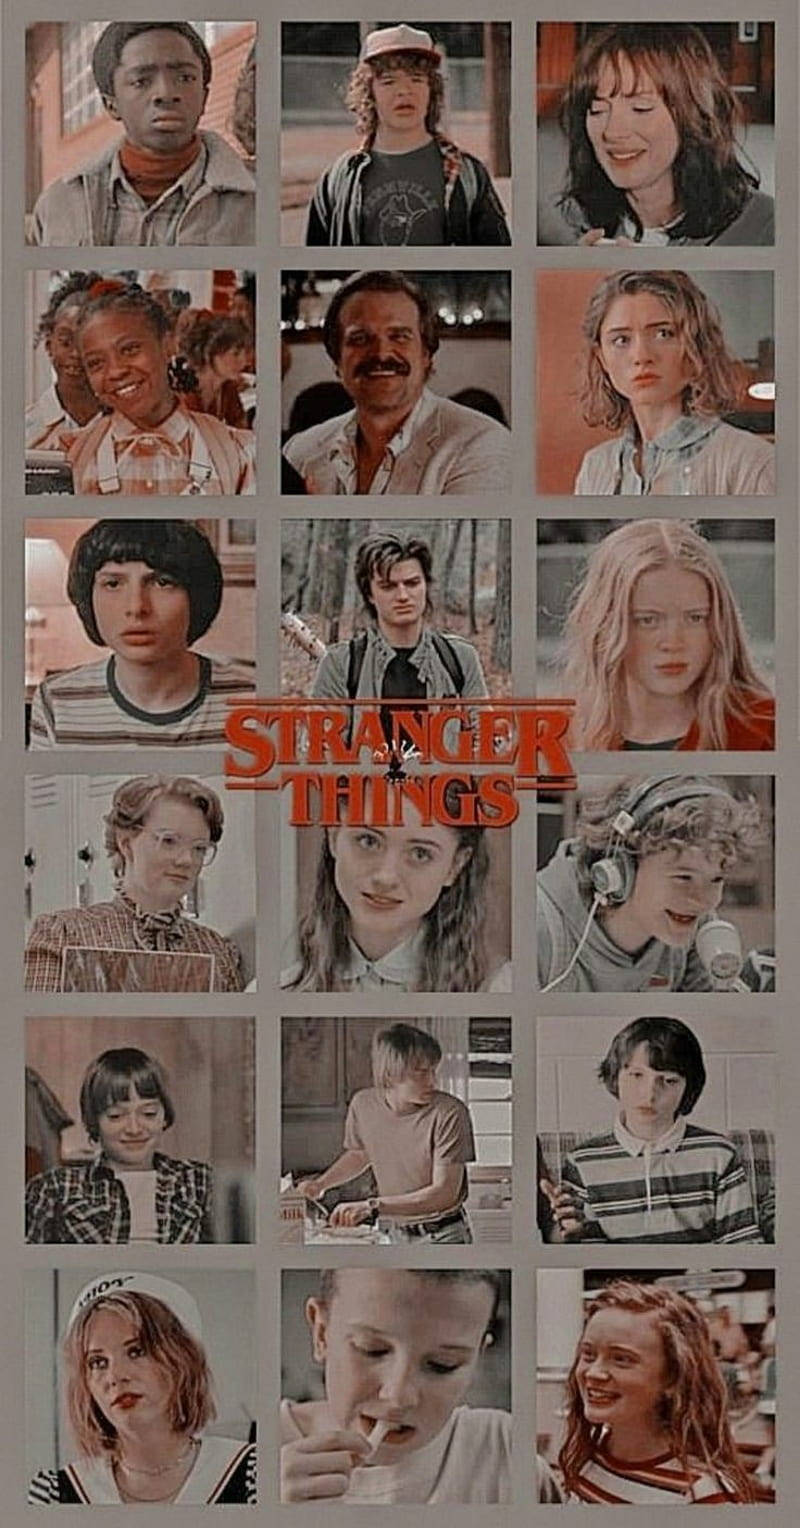 A collage of characters from Stranger Things. - Stranger Things